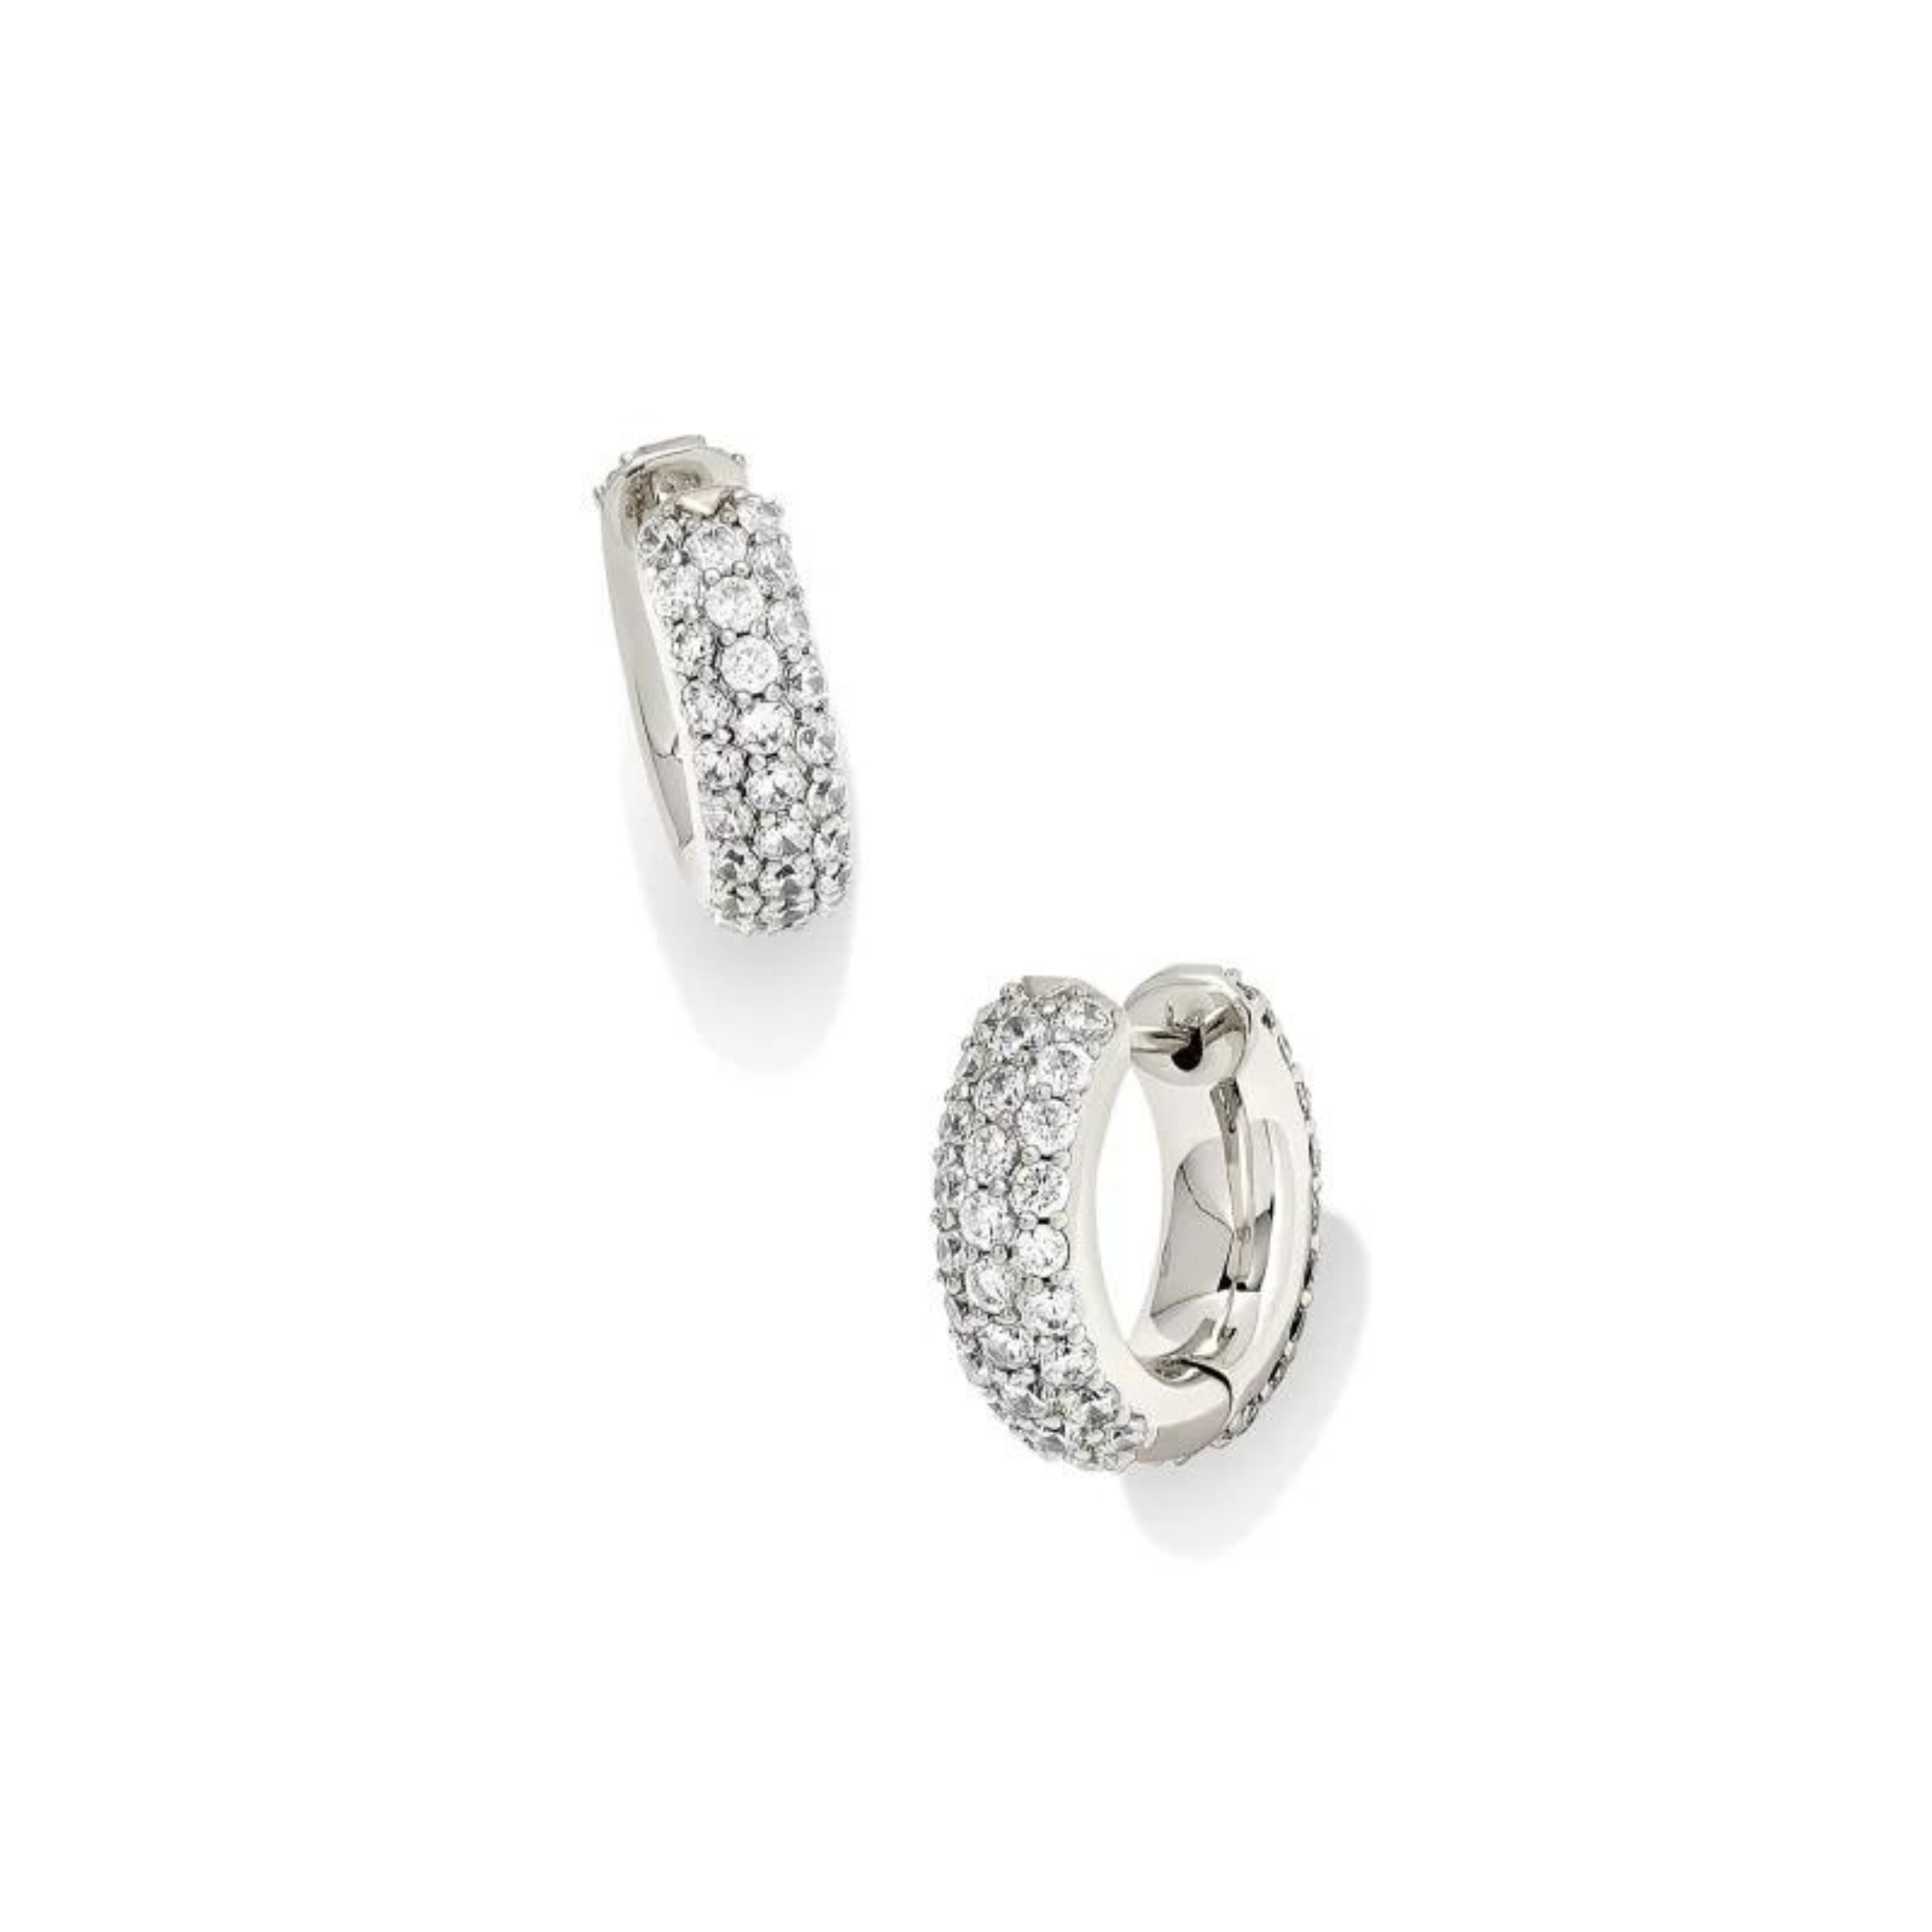 Silver crystal huggie earrings, pictured on a white background.